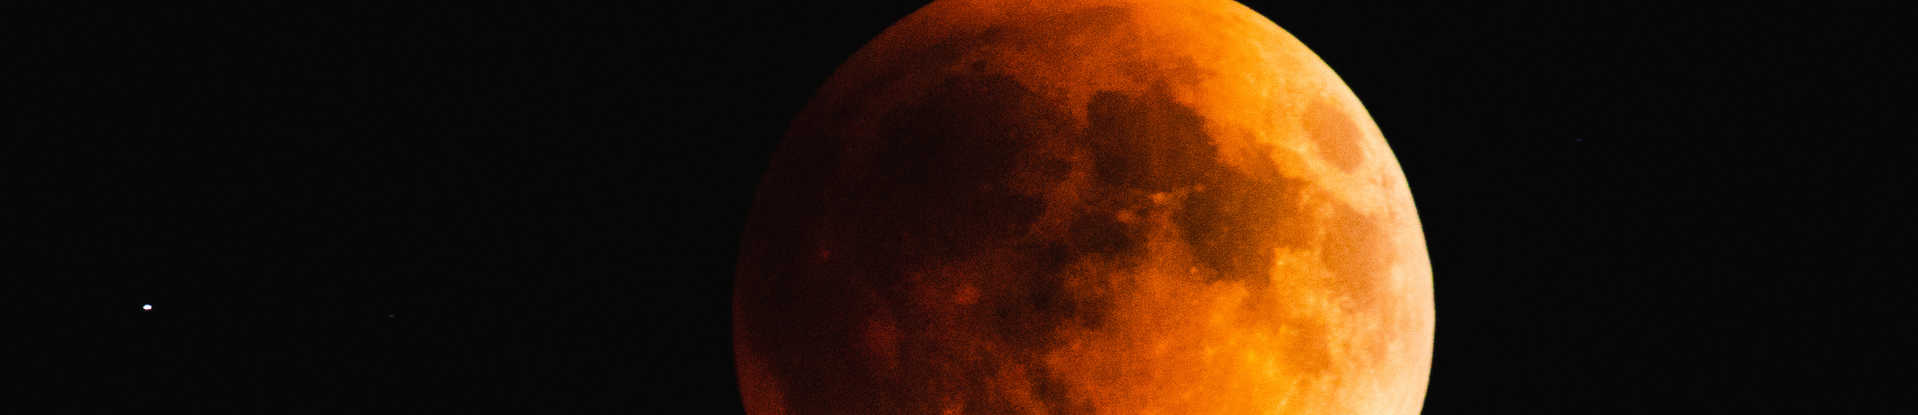 Press Release-SwRI-led Lucy Mission Observes a Total Lunar Eclipse